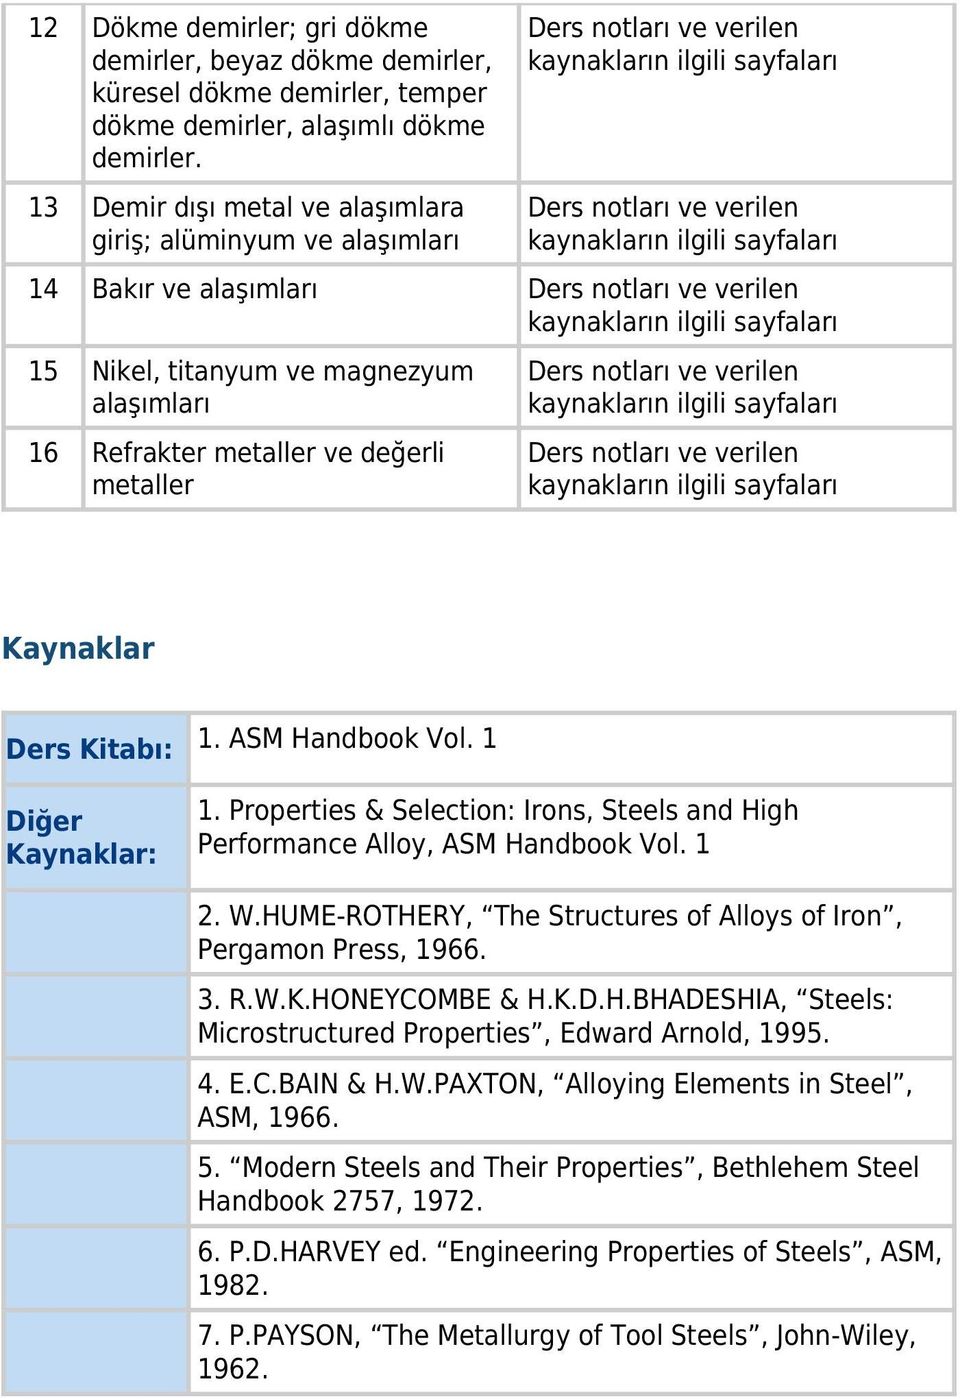 ASM Handbook Vol. 1 Diğer Kaynaklar: 1. Properties & Selection: Irons, Steels and High Performance Alloy, ASM Handbook Vol. 1 2. W.HUME-ROTHERY, The Structures of Alloys of Iron, Pergamon Press, 1966.